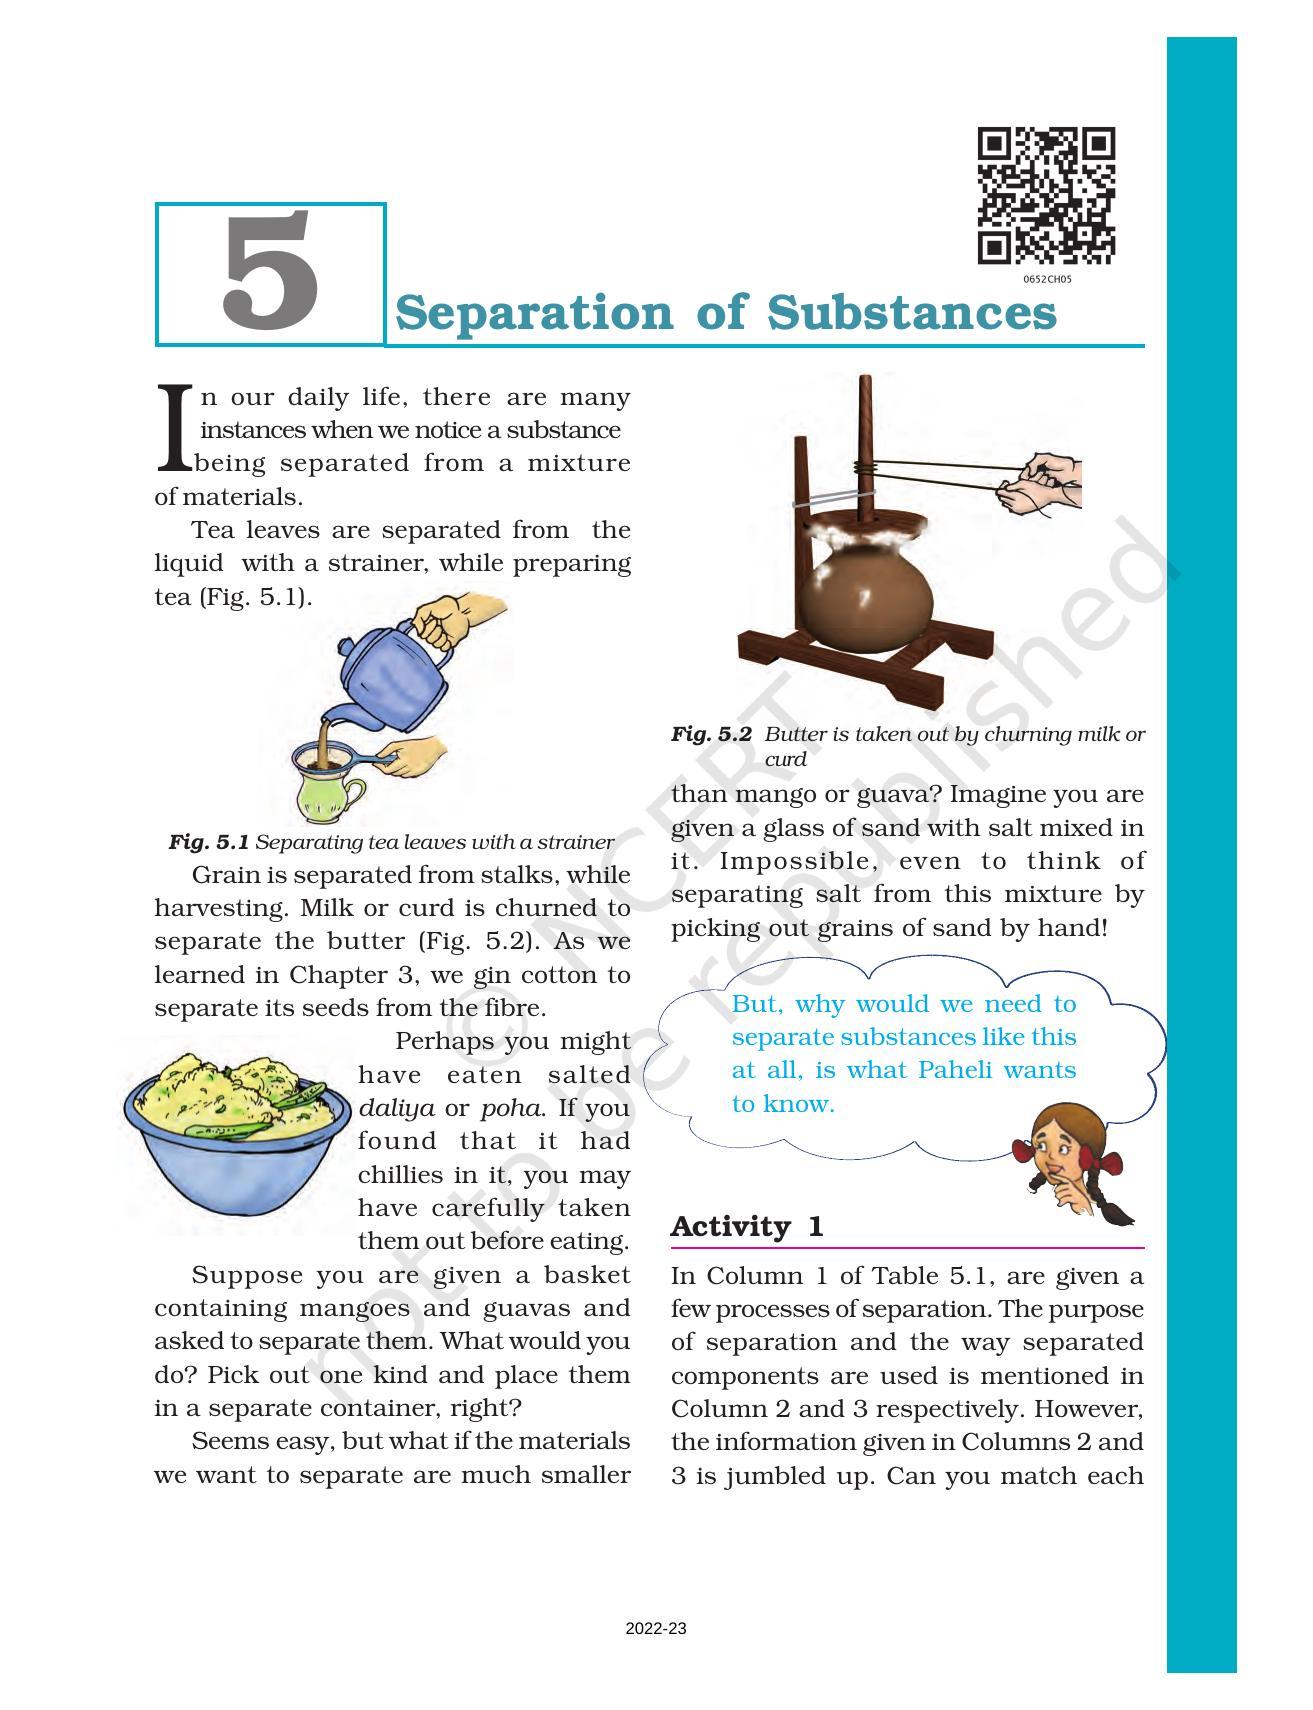 NCERT Book for Class 6 Science: Chapter 5-Separation of Substances - Page 1